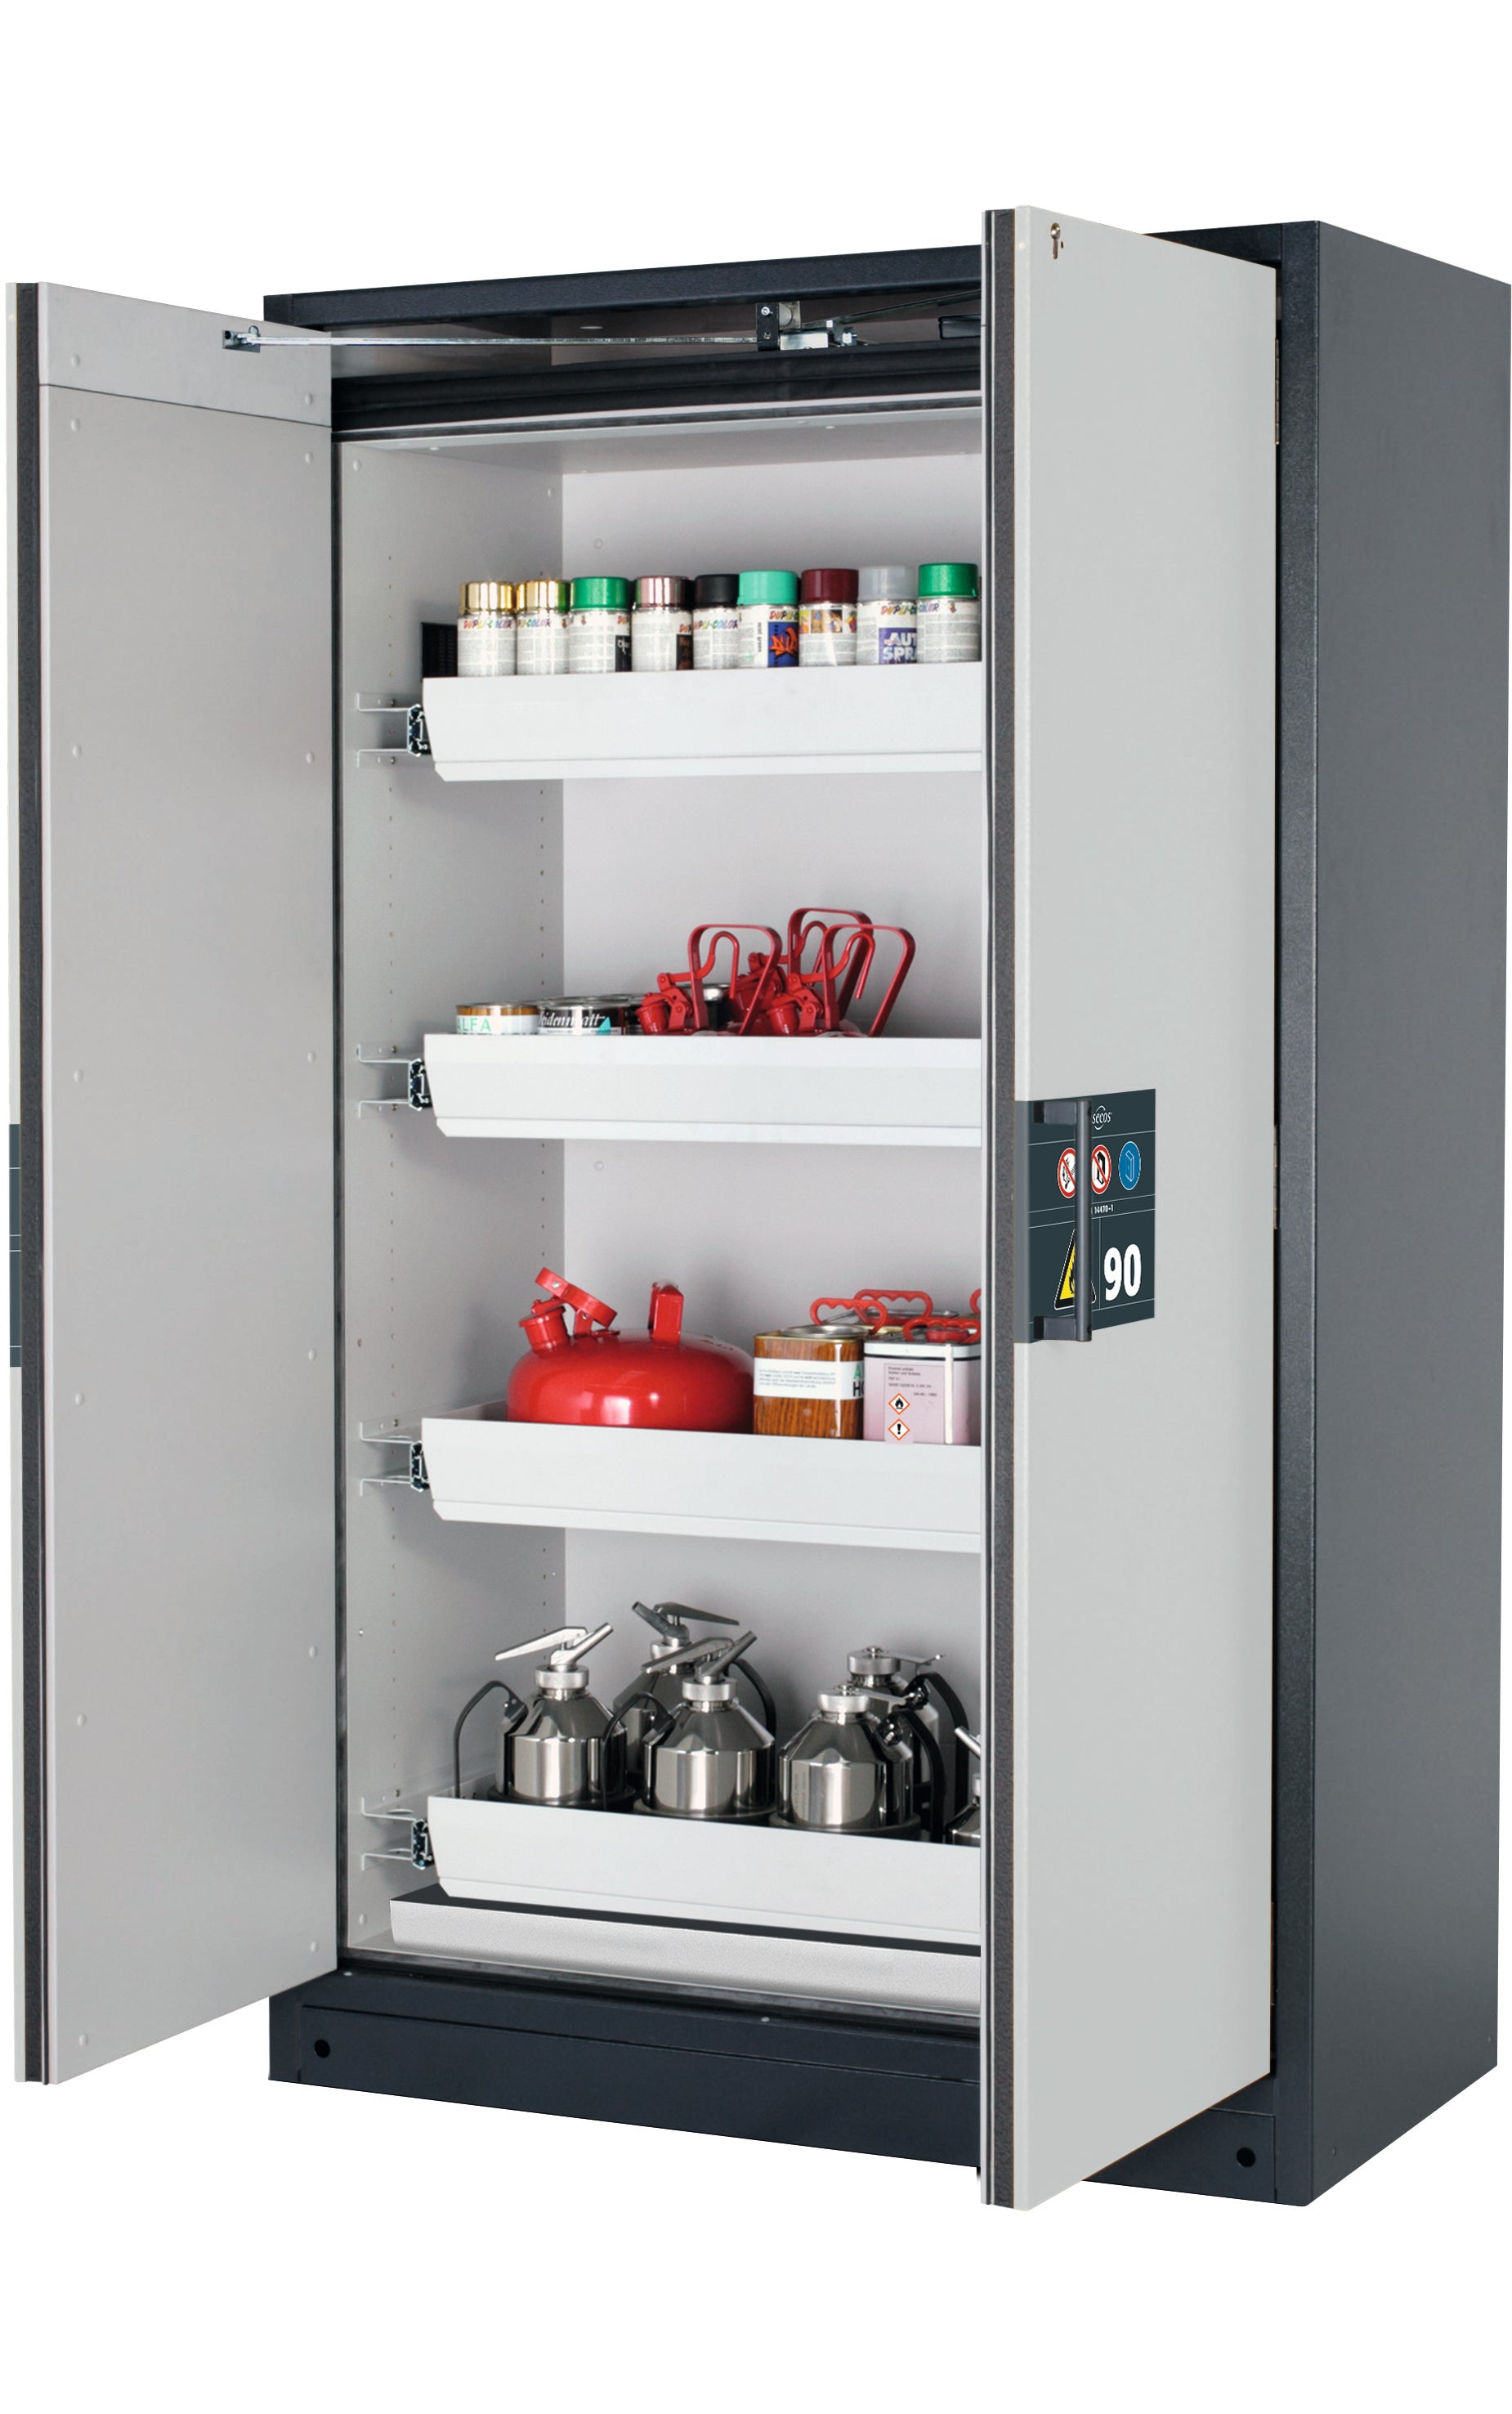 Type 90 safety storage cabinet Q-PEGASUS-90 model Q90.195.120.WDAC in light grey RAL 7035 with 4x drawer (standard) (sheet steel),